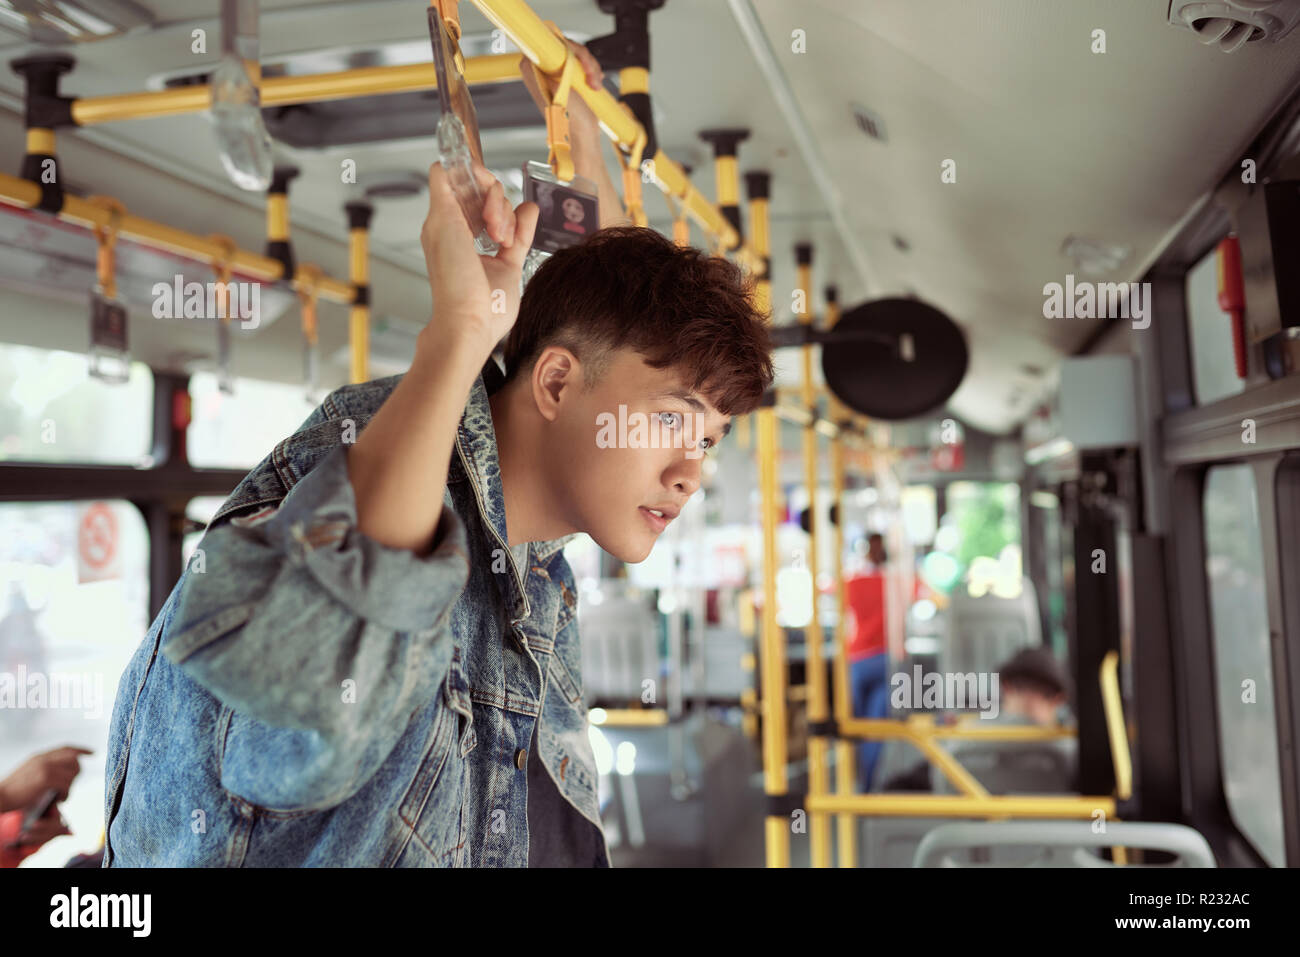 People, lifestyle, travel and public transport. Asian man standing inside city bus. Stock Photo